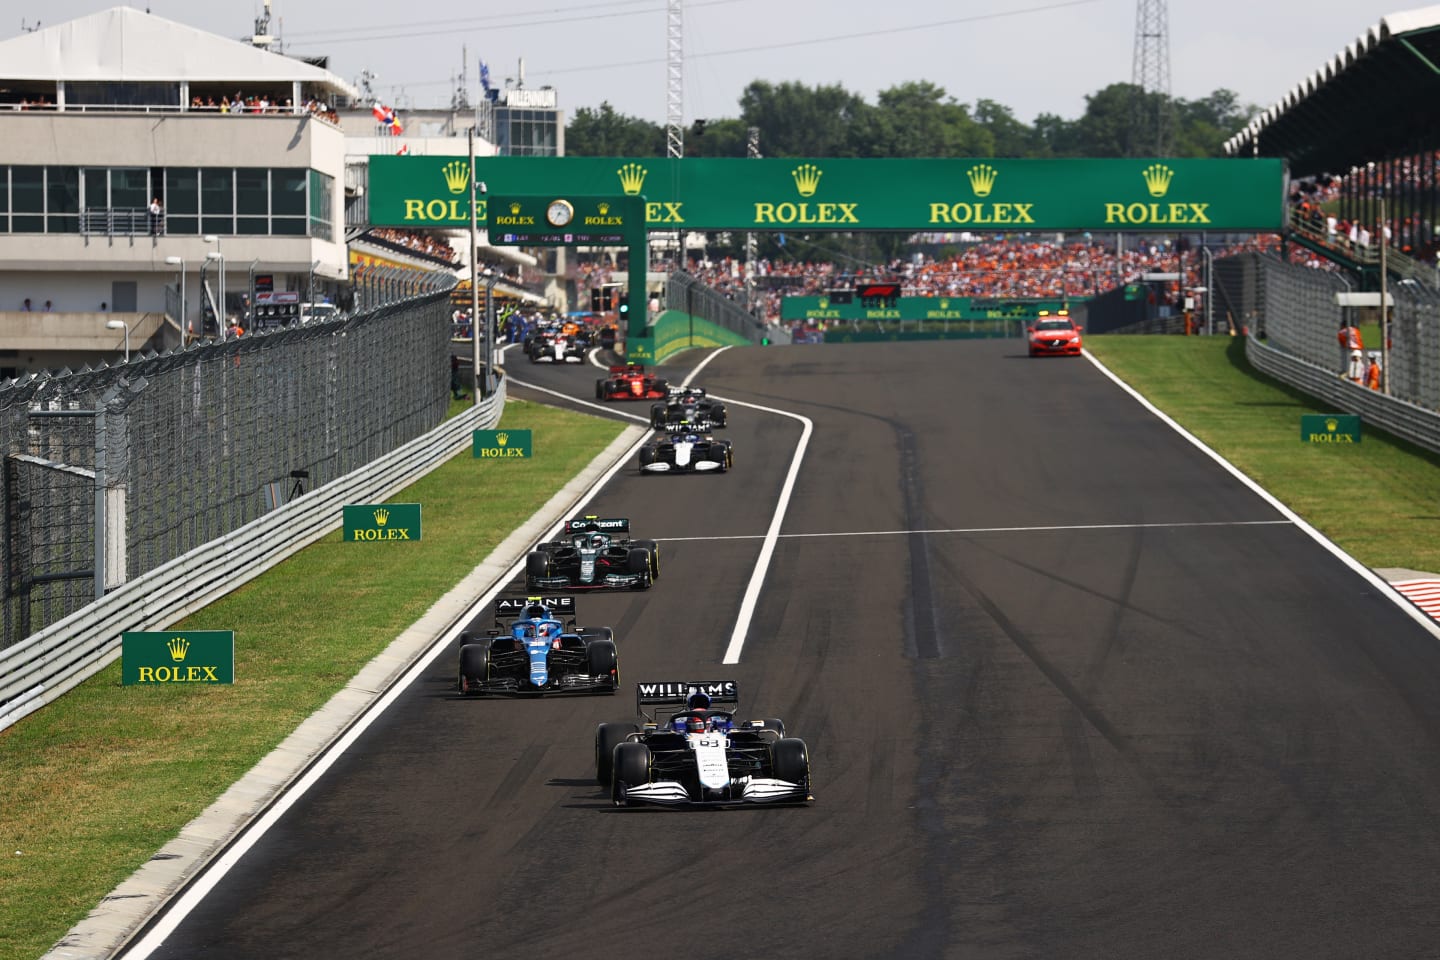 BUDAPEST, HUNGARY - AUGUST 01: George Russell of Great Britain driving the (63) Williams Racing FW43B Mercedes leads a line of cars out of the pitlane after pitting at the restart during the F1 Grand Prix of Hungary at Hungaroring on August 01, 2021 in Budapest, Hungary. (Photo by Bryn Lennon/Getty Images)